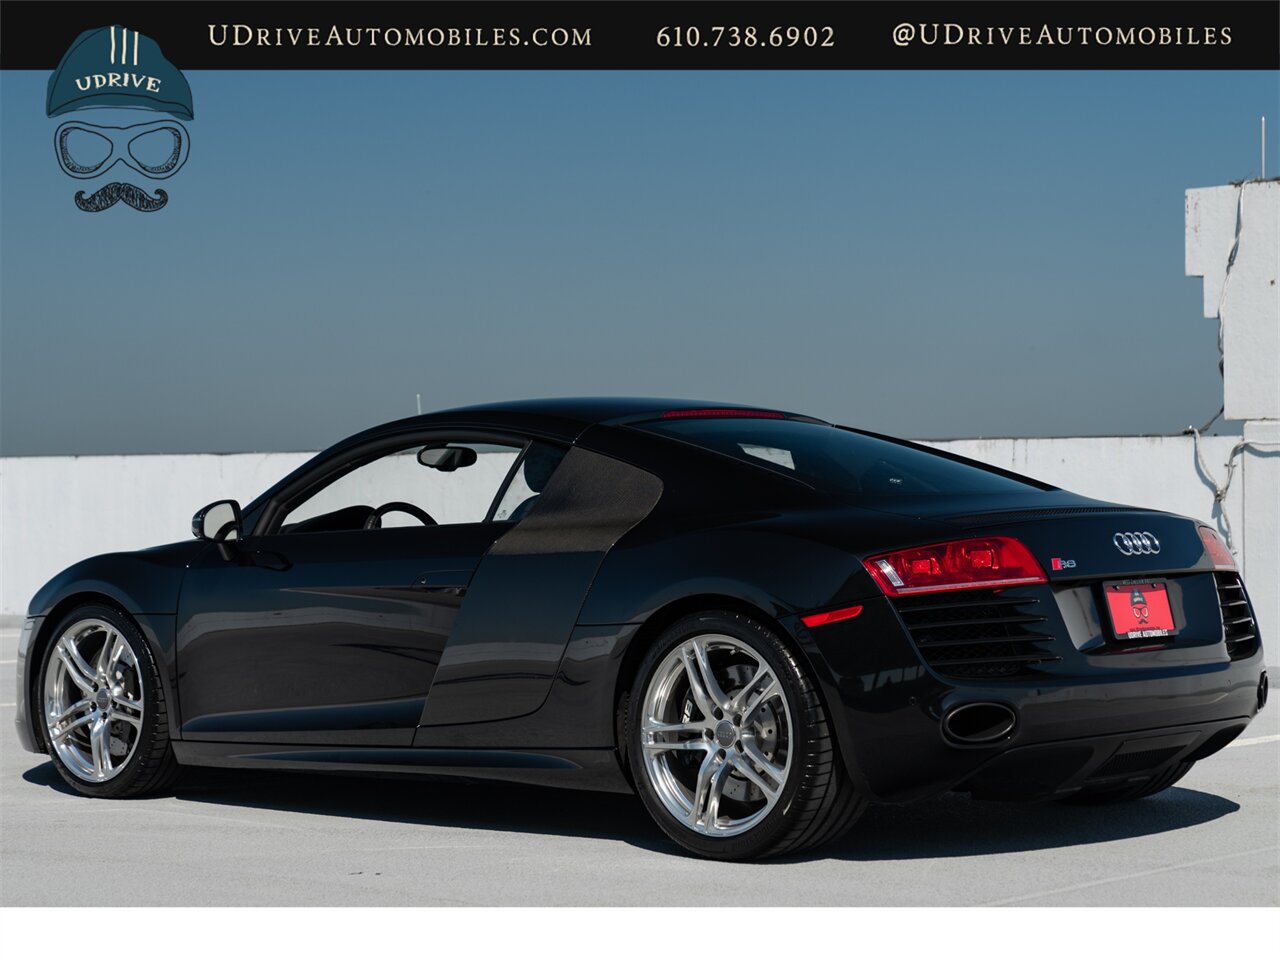 2009 Audi R8 Quattro  4.2L V8 6 Speed Manual - Photo 23 - West Chester, PA 19382